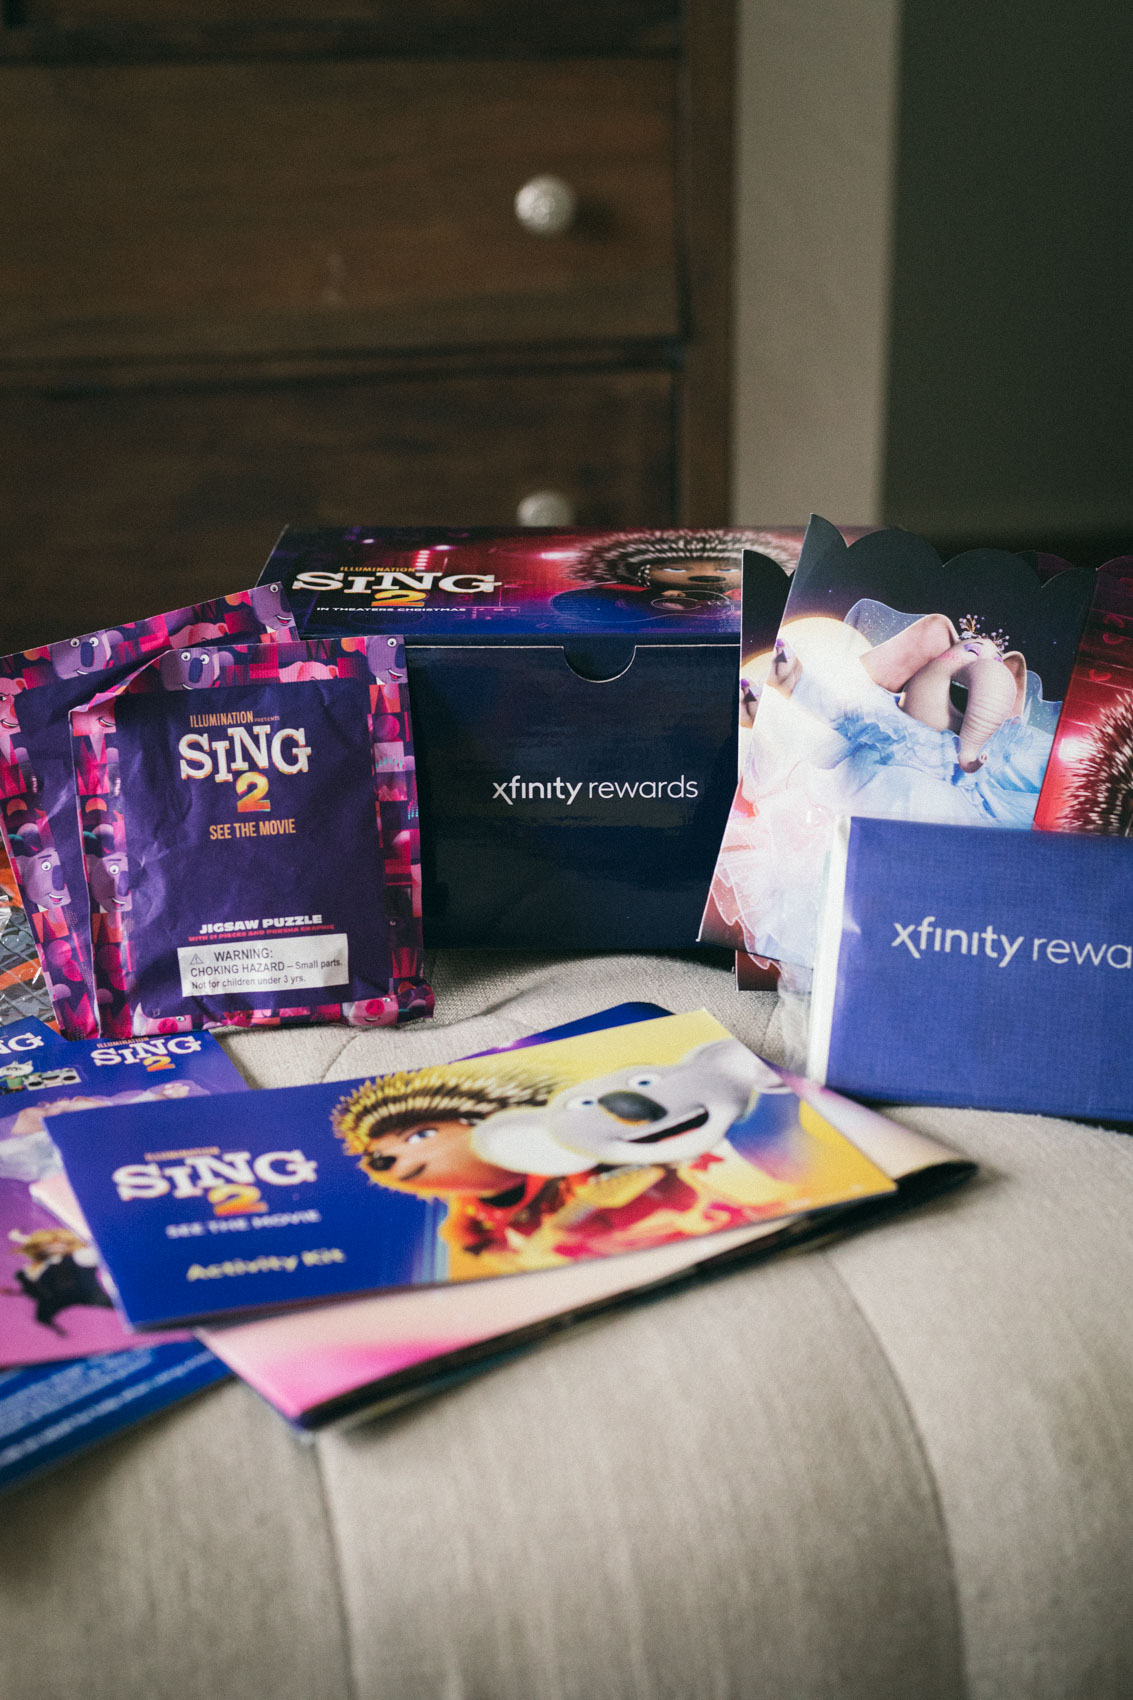 Get fun freebies and perks for joining Xfinity Rewards